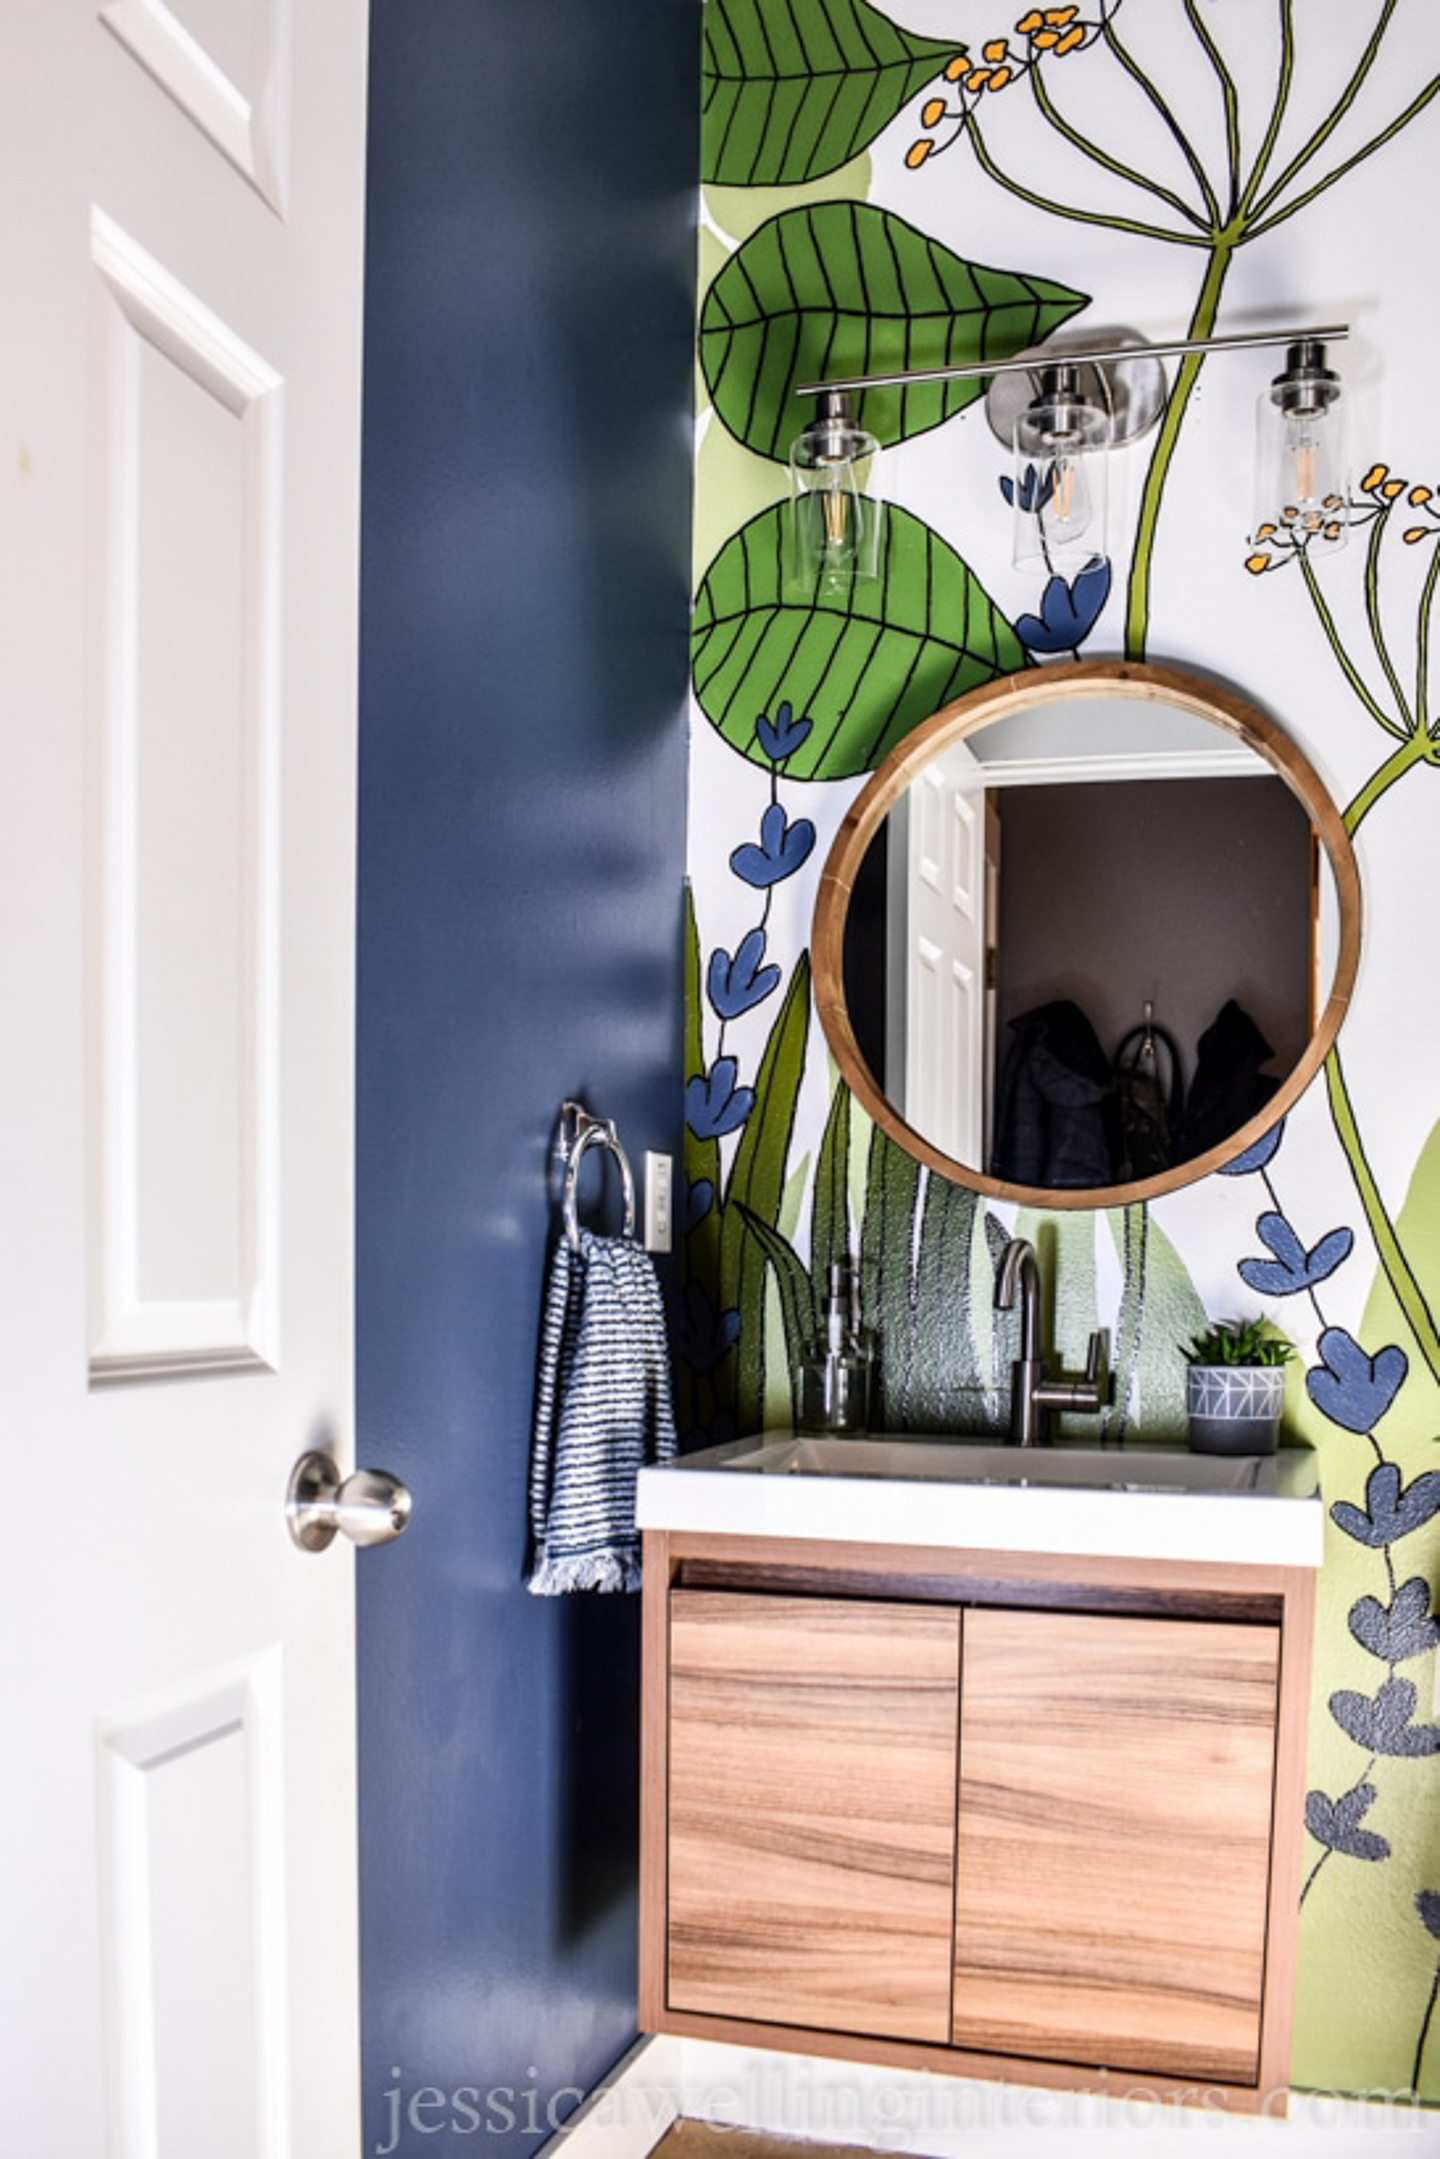 Bathroom wall hand painted with a large botanical mural via jessicawellinginteriors